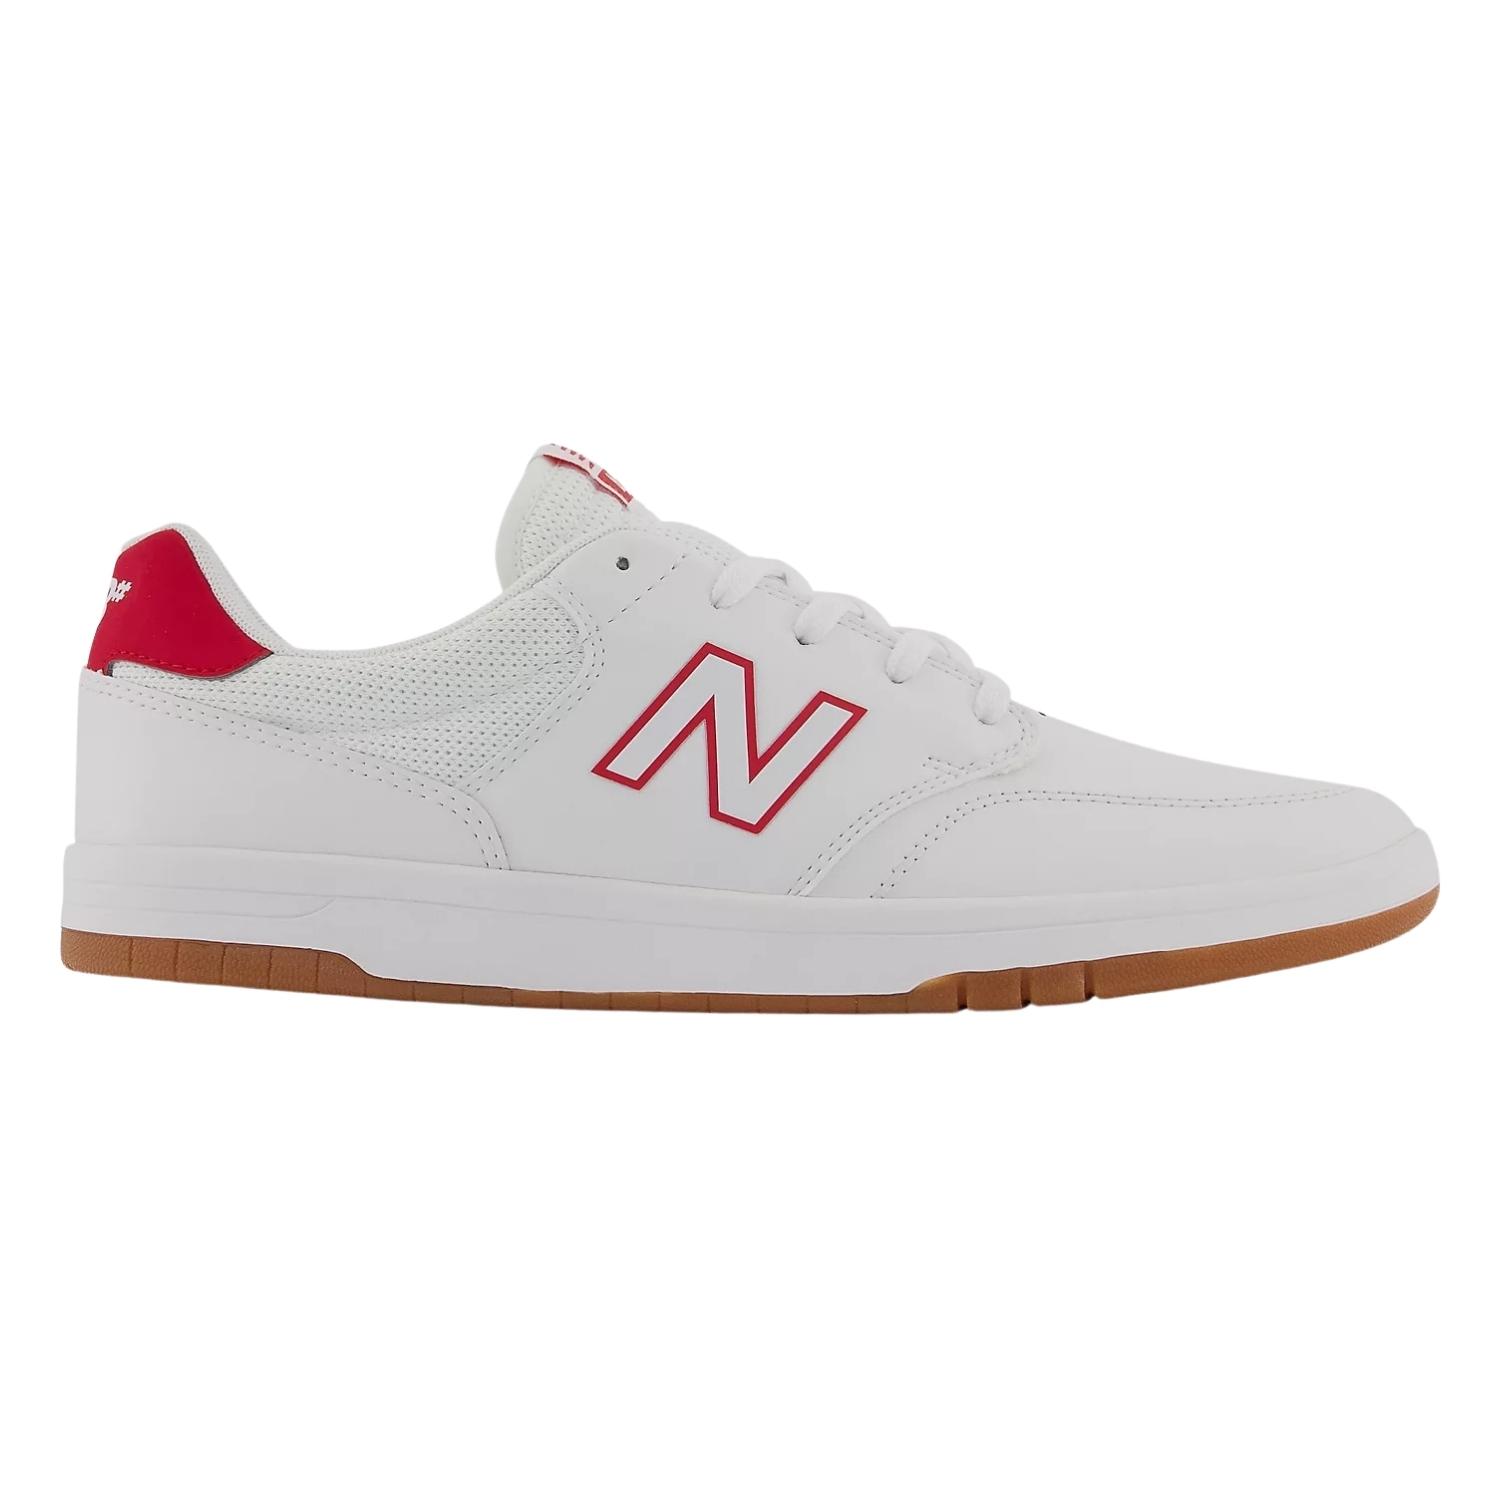 New Balance Numeric NM425 Shoes - White/Red